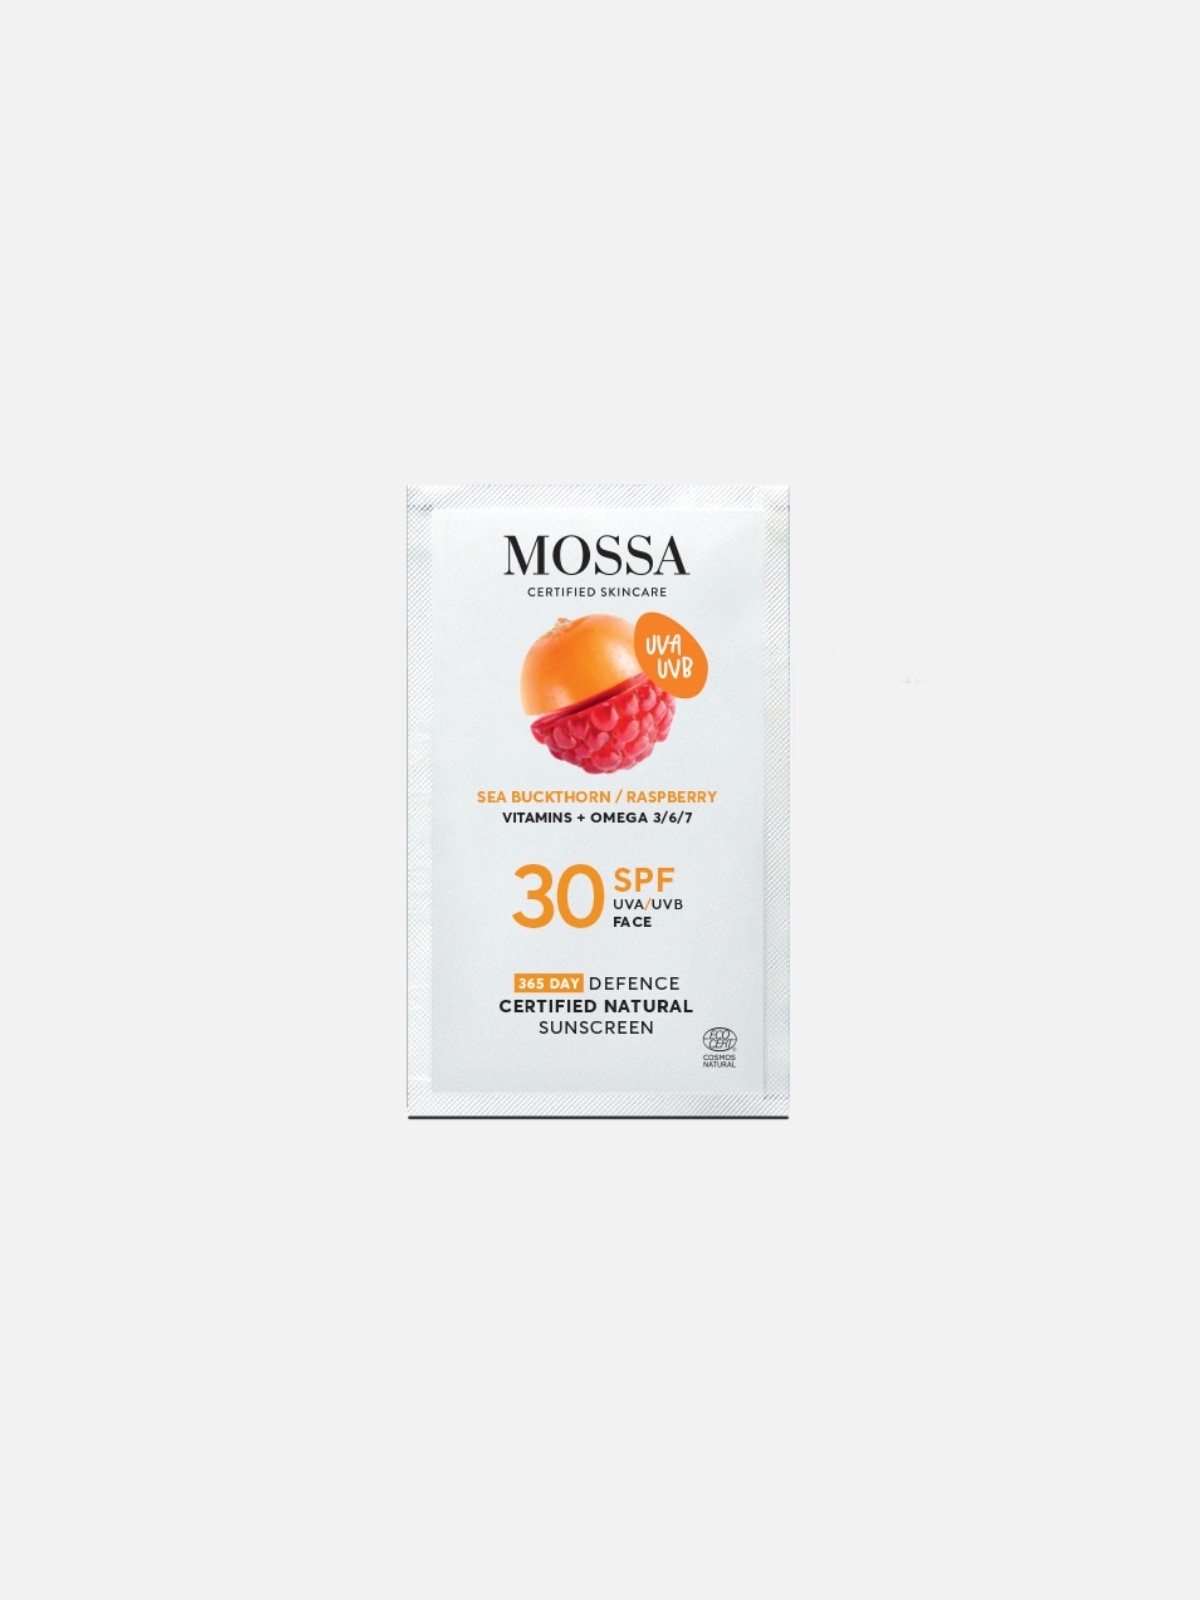 Mossa - 365 Day Defence Certified Natural Sunscreen